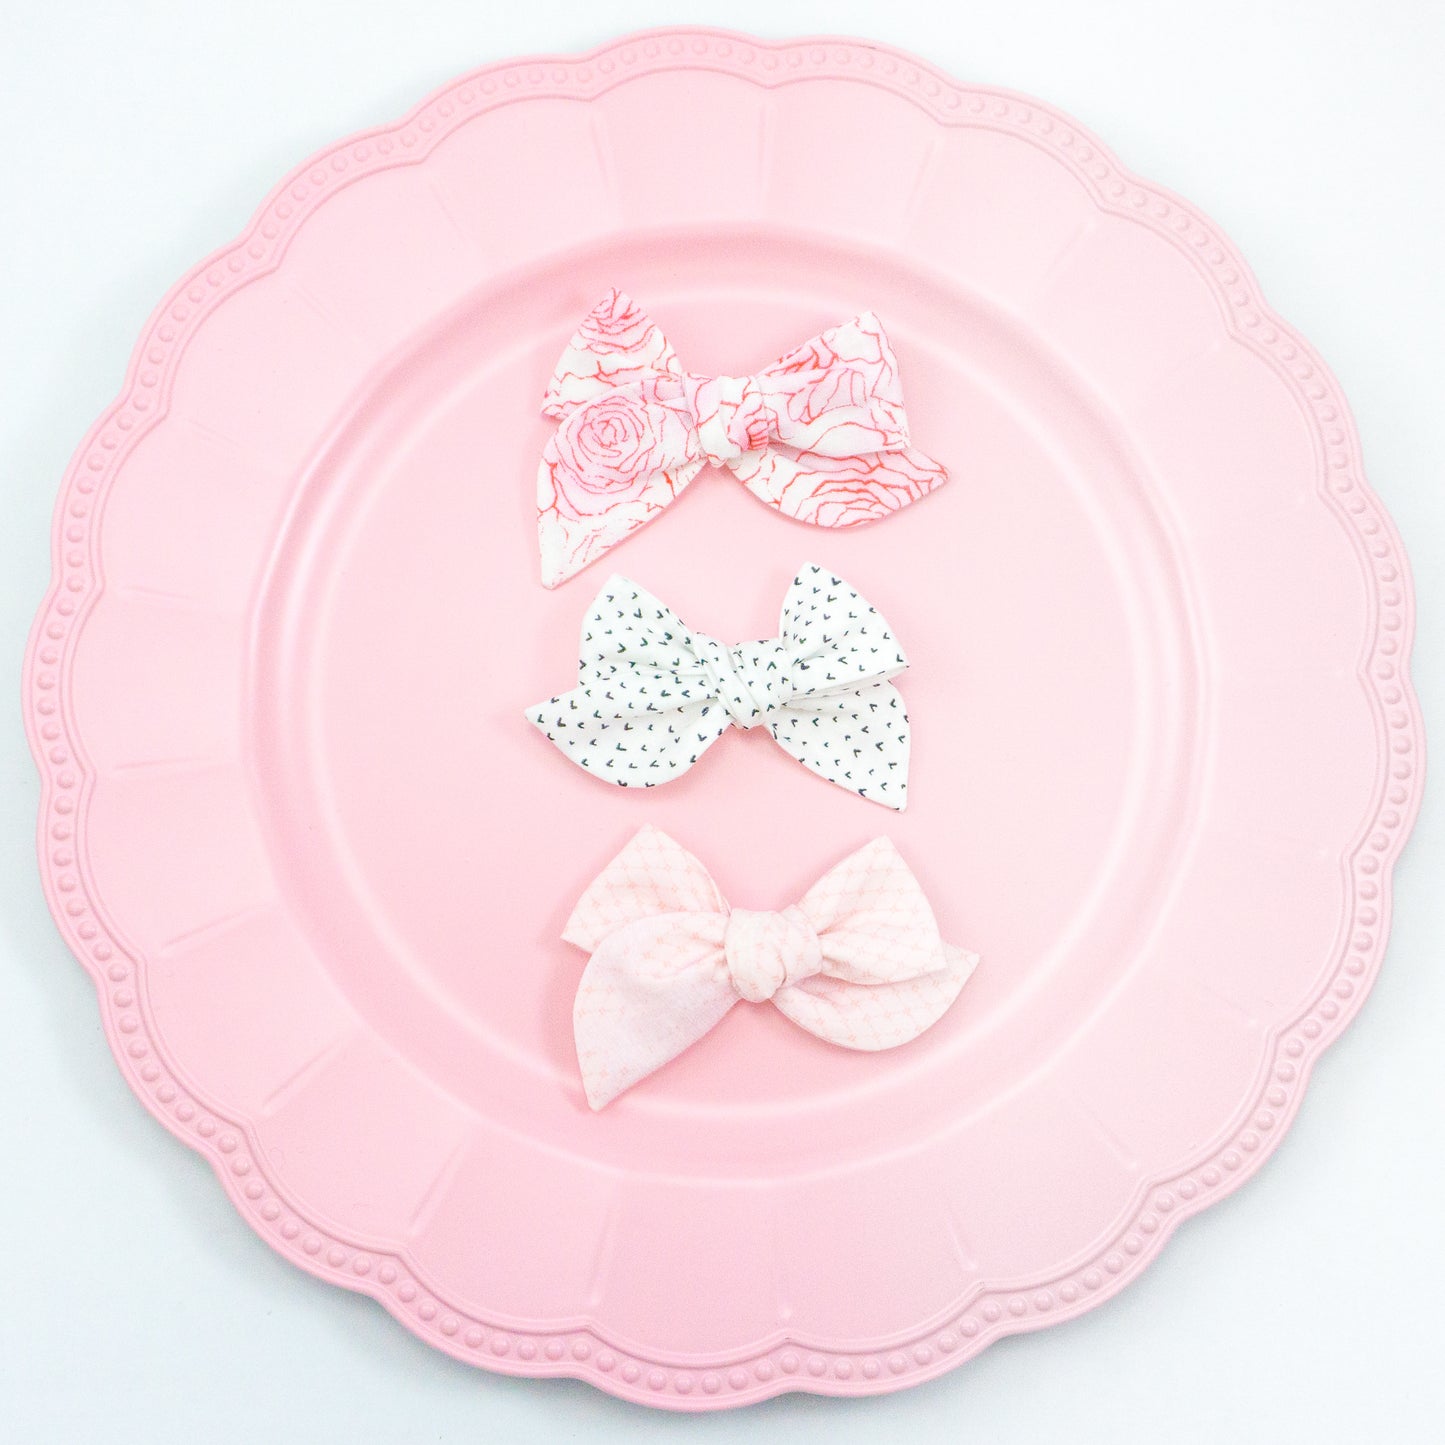 Handtied Fabric Bow - Pink Floral